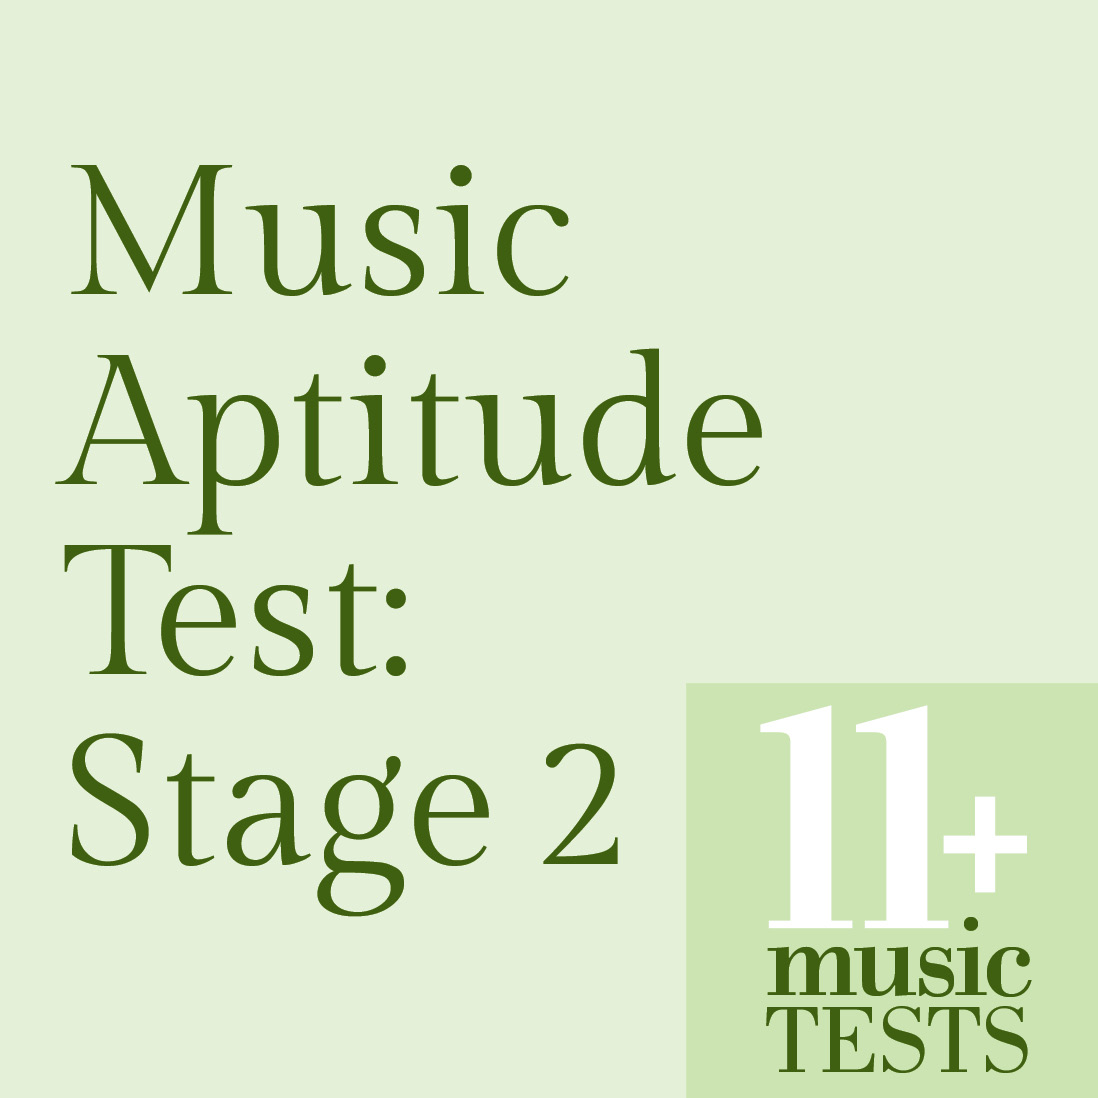 graphic-scores-for-music-aptitude-test-training-helping-you-prepare-for-the-2019-music